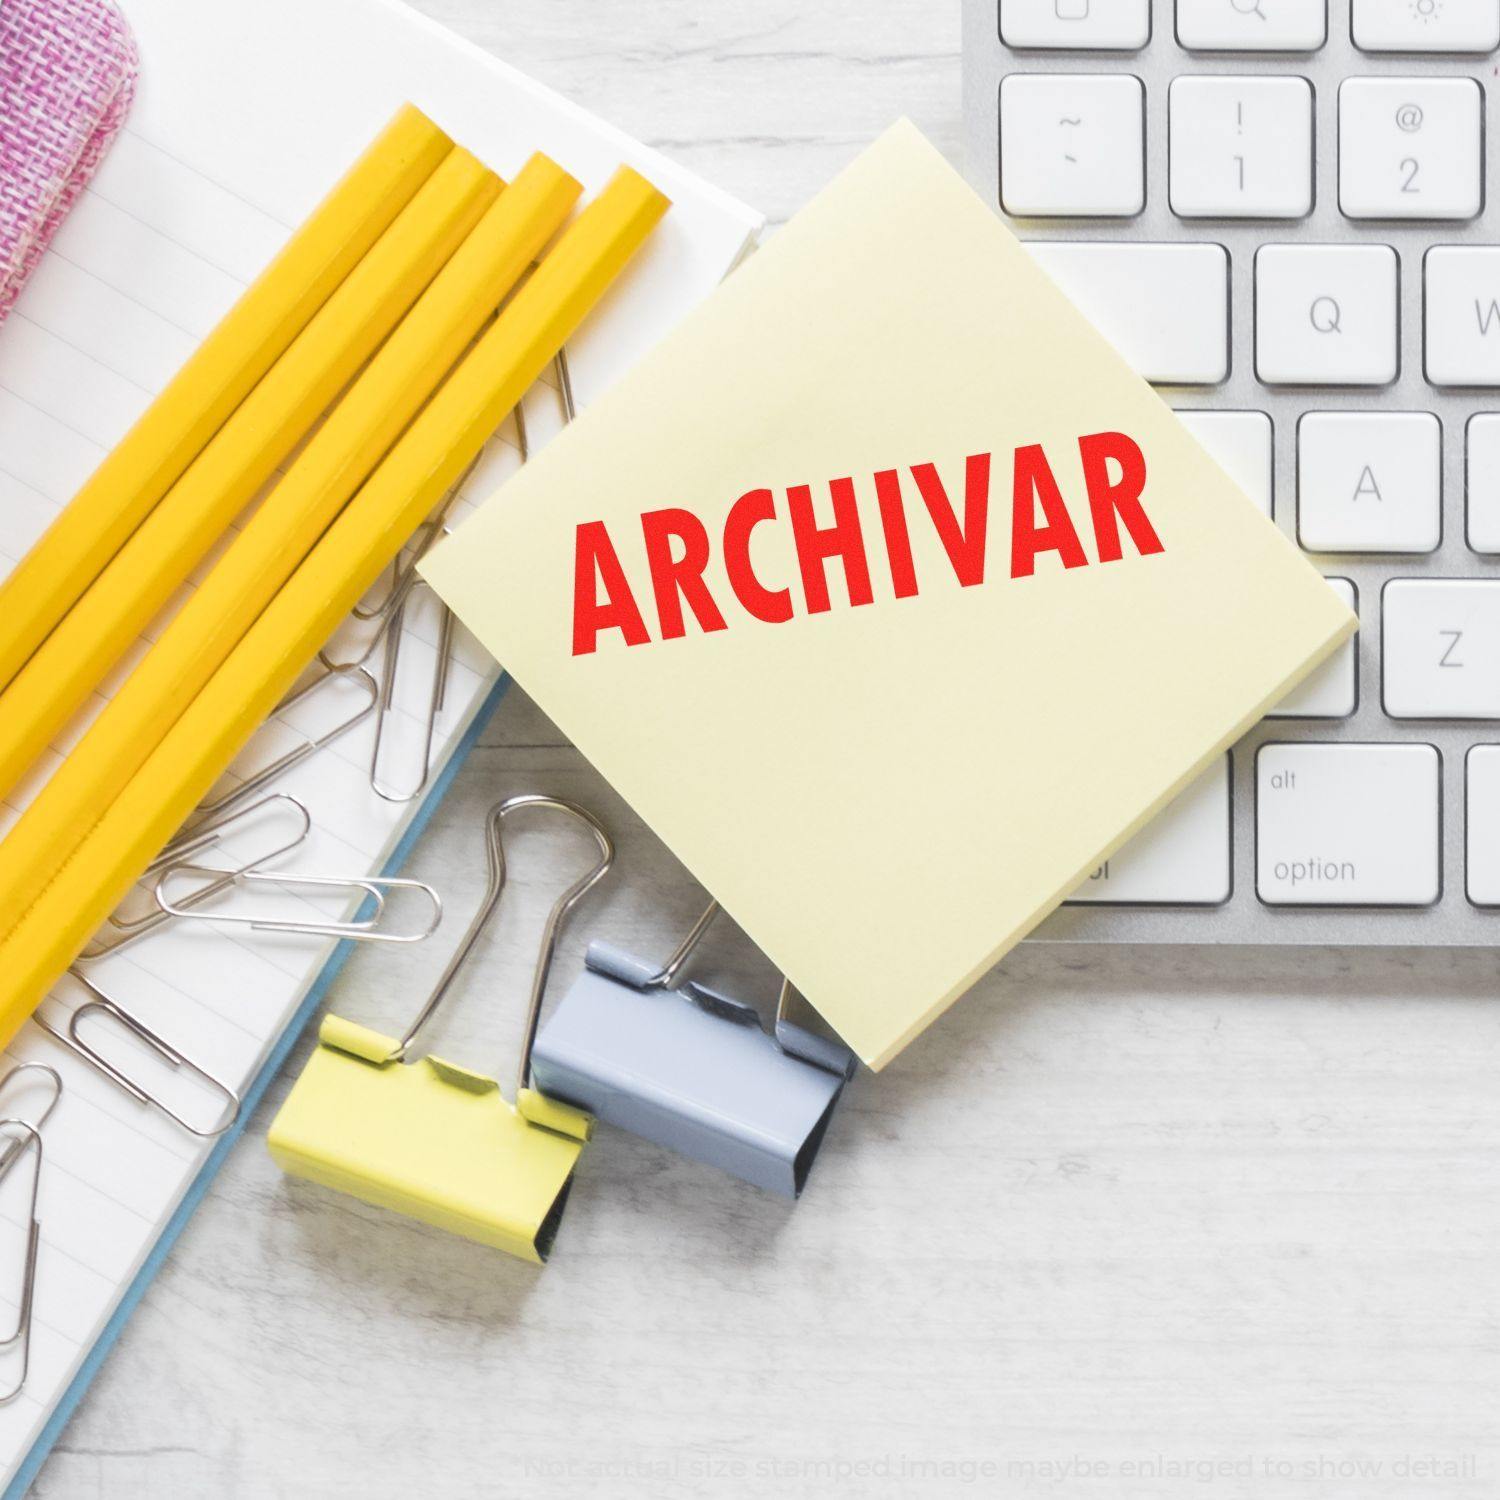 A stock office pre-inked stamp with a stamped image showing how the text "ARCHIVAR" is displayed after stamping.